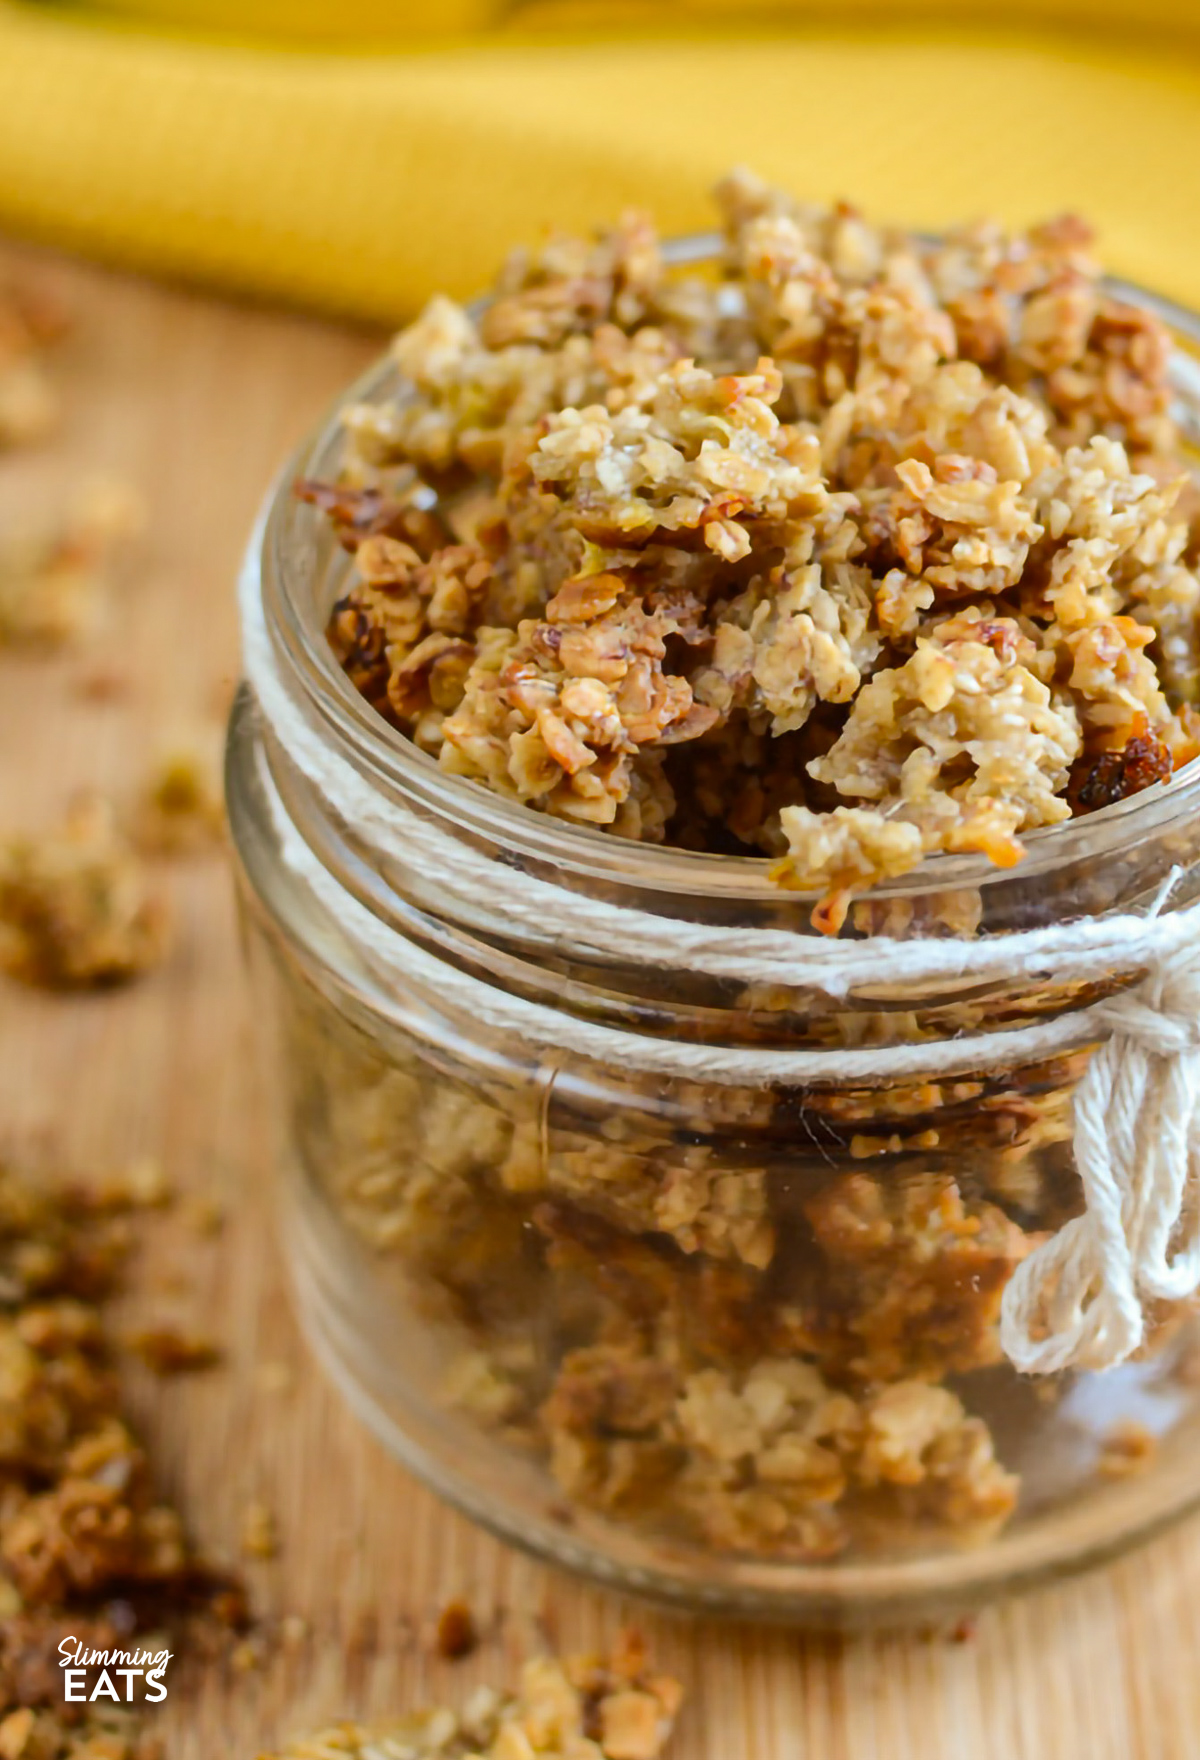 Banana granola beautifully presented in a small jar, decorated with a white rope thread tied around it, and whole bananas in the background for a natural, appetizing setting